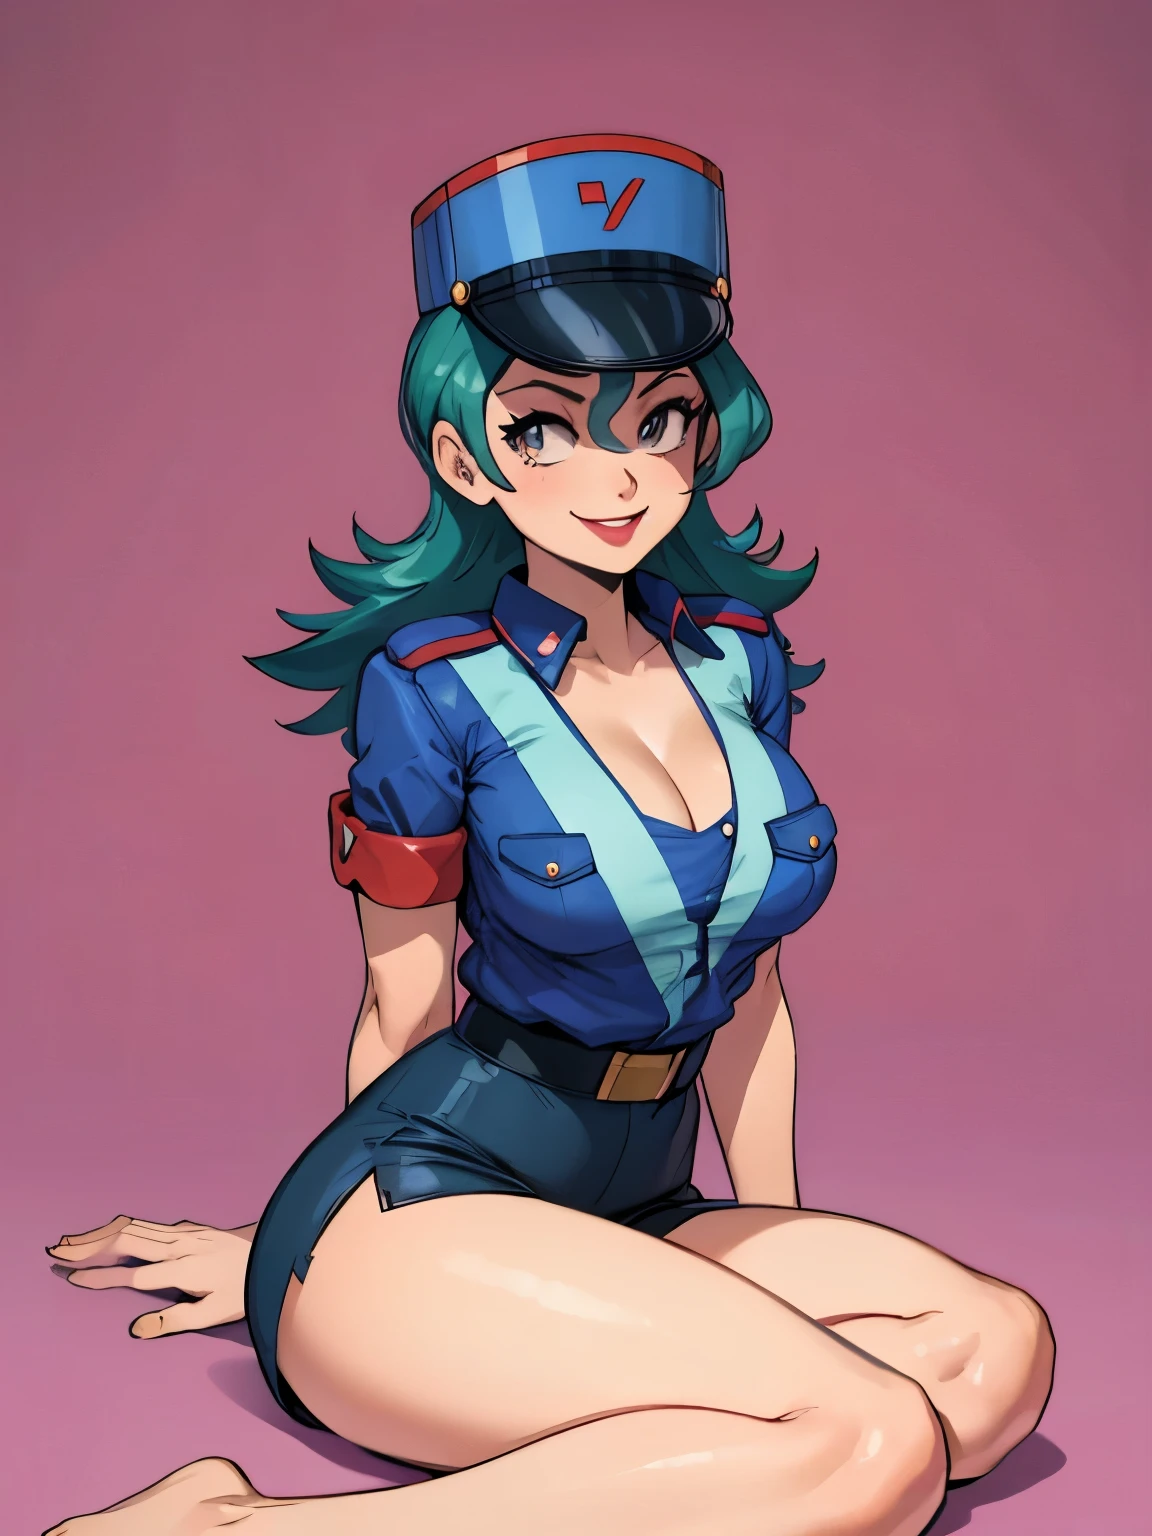 Jenny-pokemon, goregous police woman, sitting, perfect legs, ((arms behind back)), unbutton shirt, busty, colossal cleavage, lipstick, smiling, police cap, ((plain background:1.3))